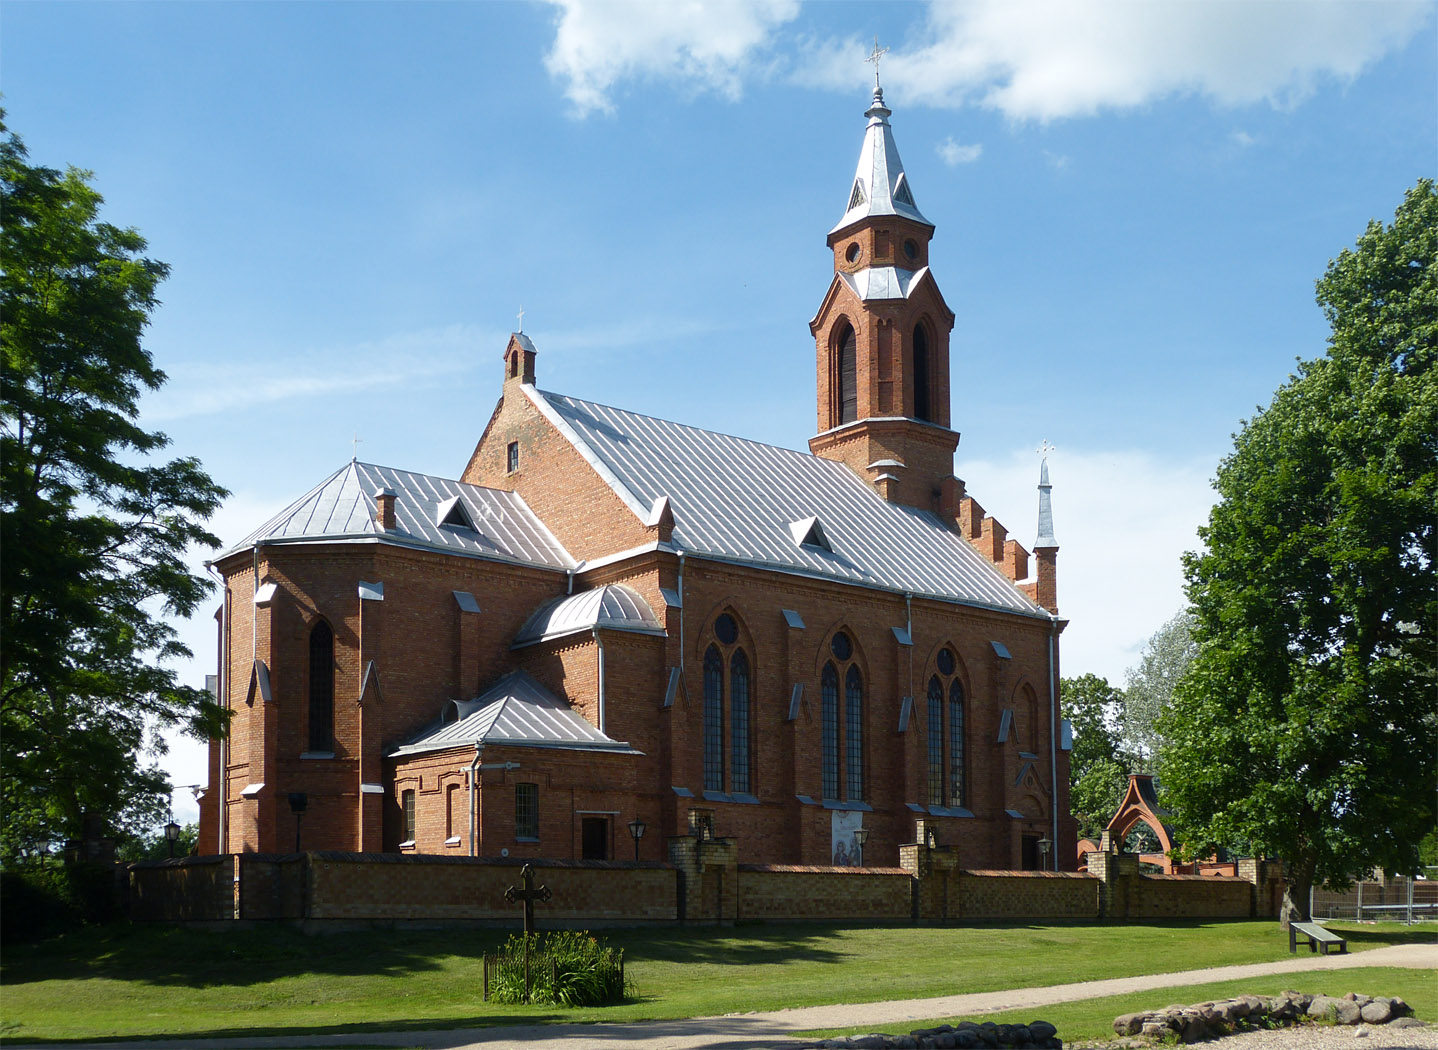 St Mary's Church, Kernave, Lithuania